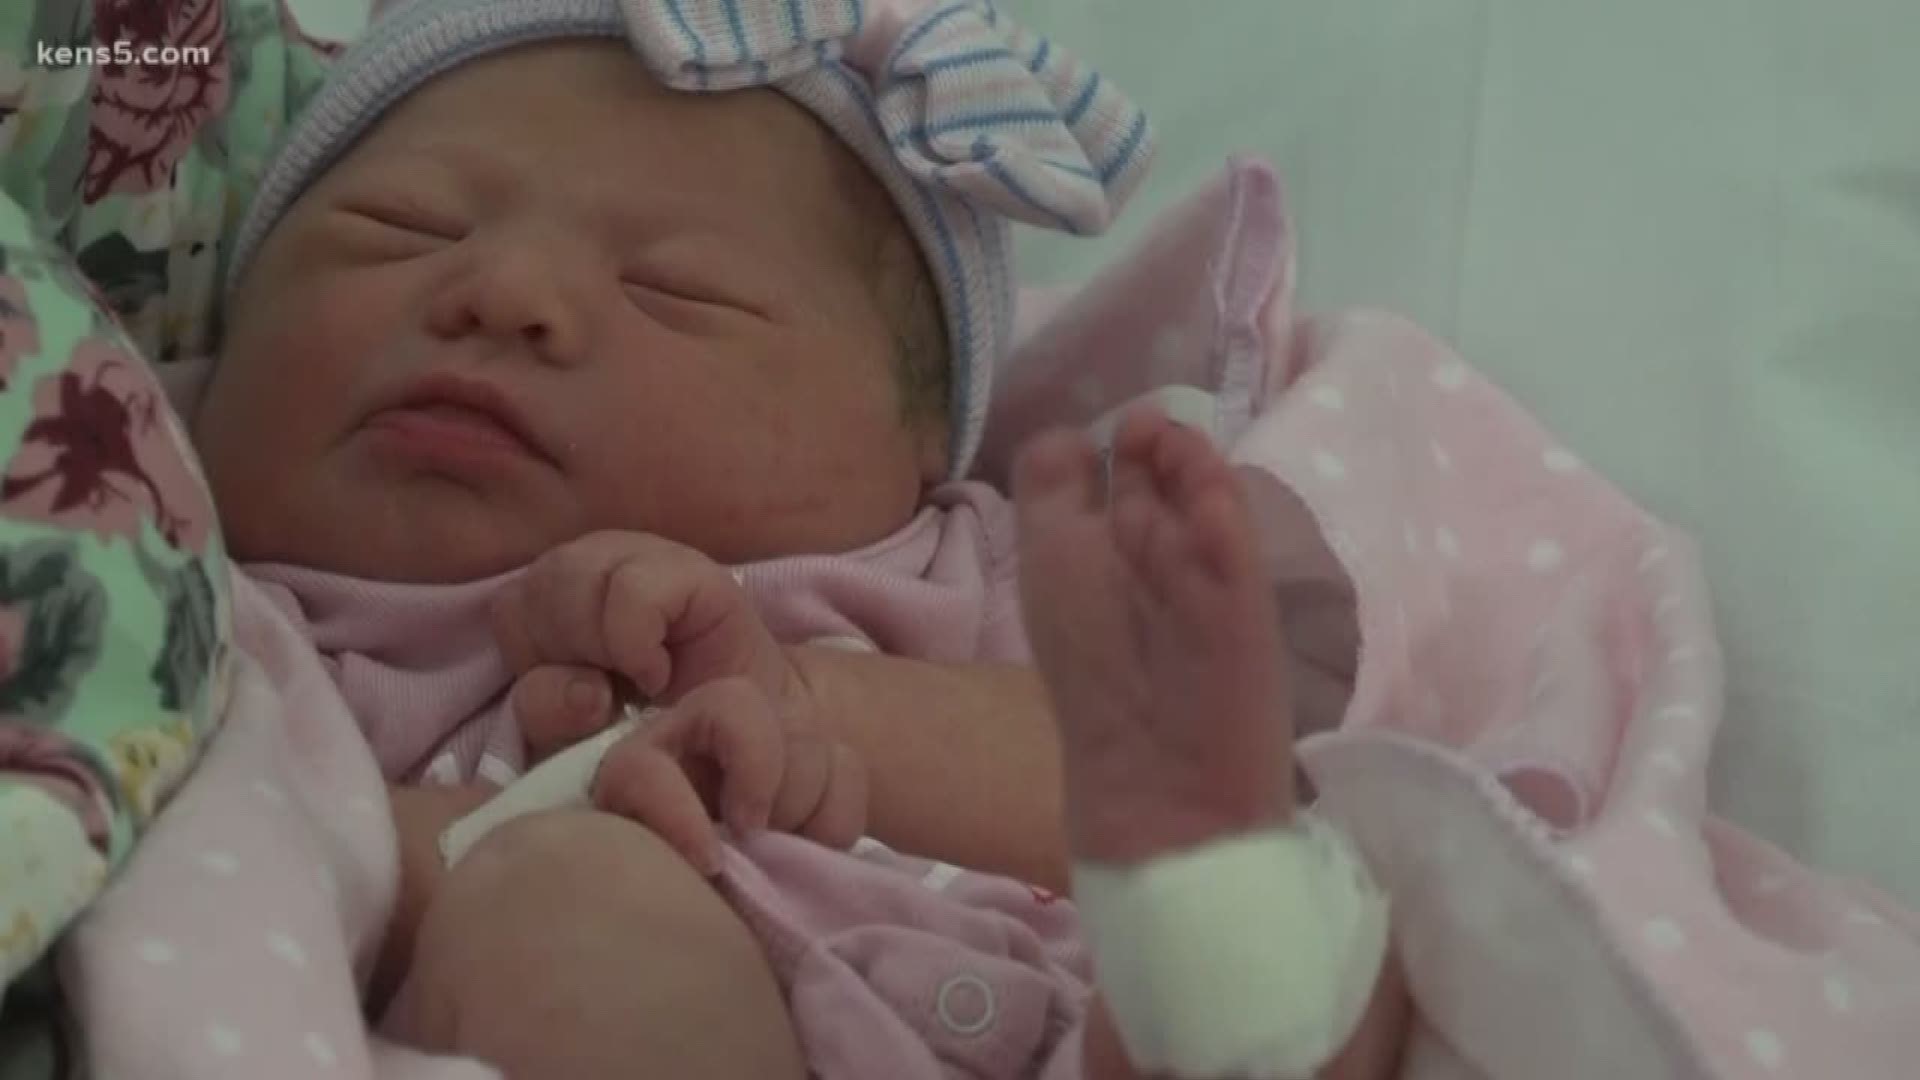 An expectant couple had planned their baby's birth for months, but early this week, they were forced to abandon those plans. Now their story has gone viral thanks to where the baby was born. Eyewitness news reporter Savannah Louie spoke exclusively with t